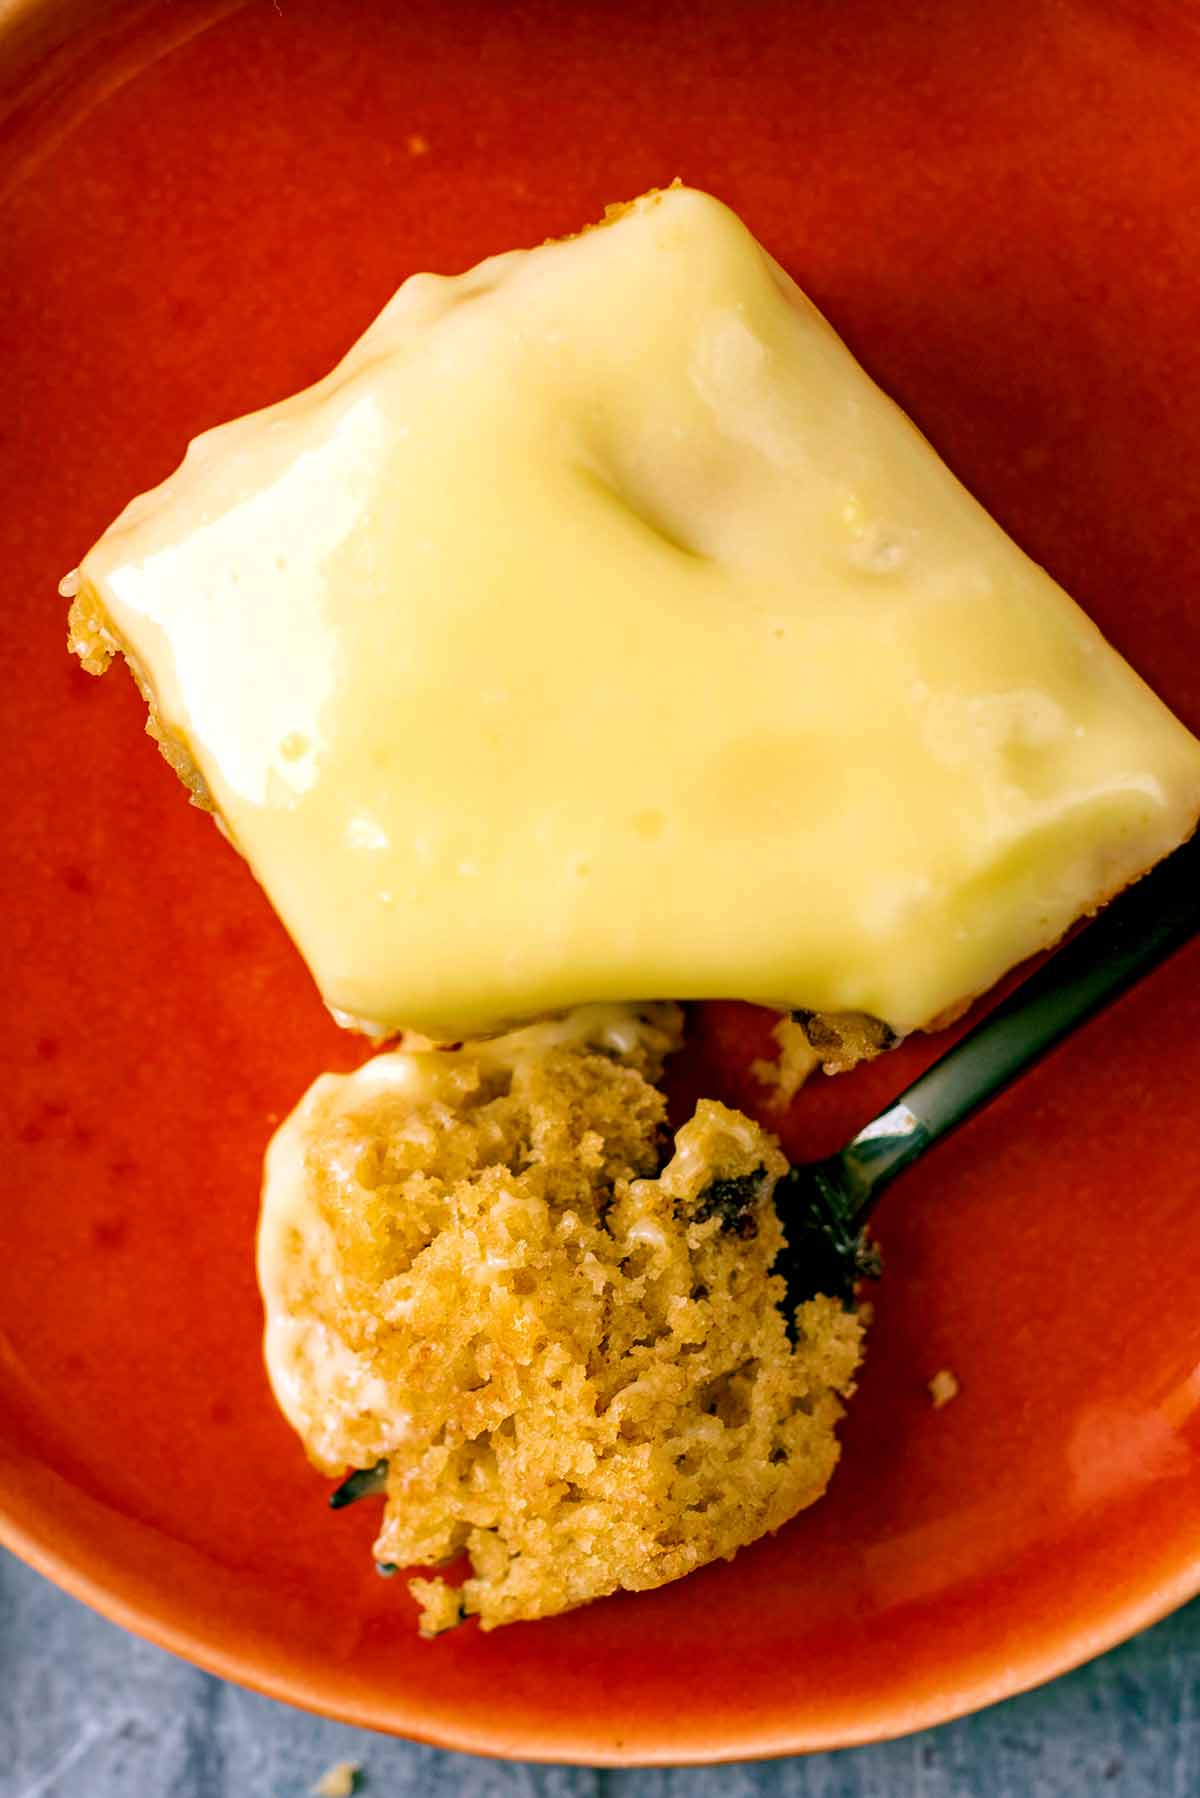 A square of iced cake with a piece cut off by a fork.